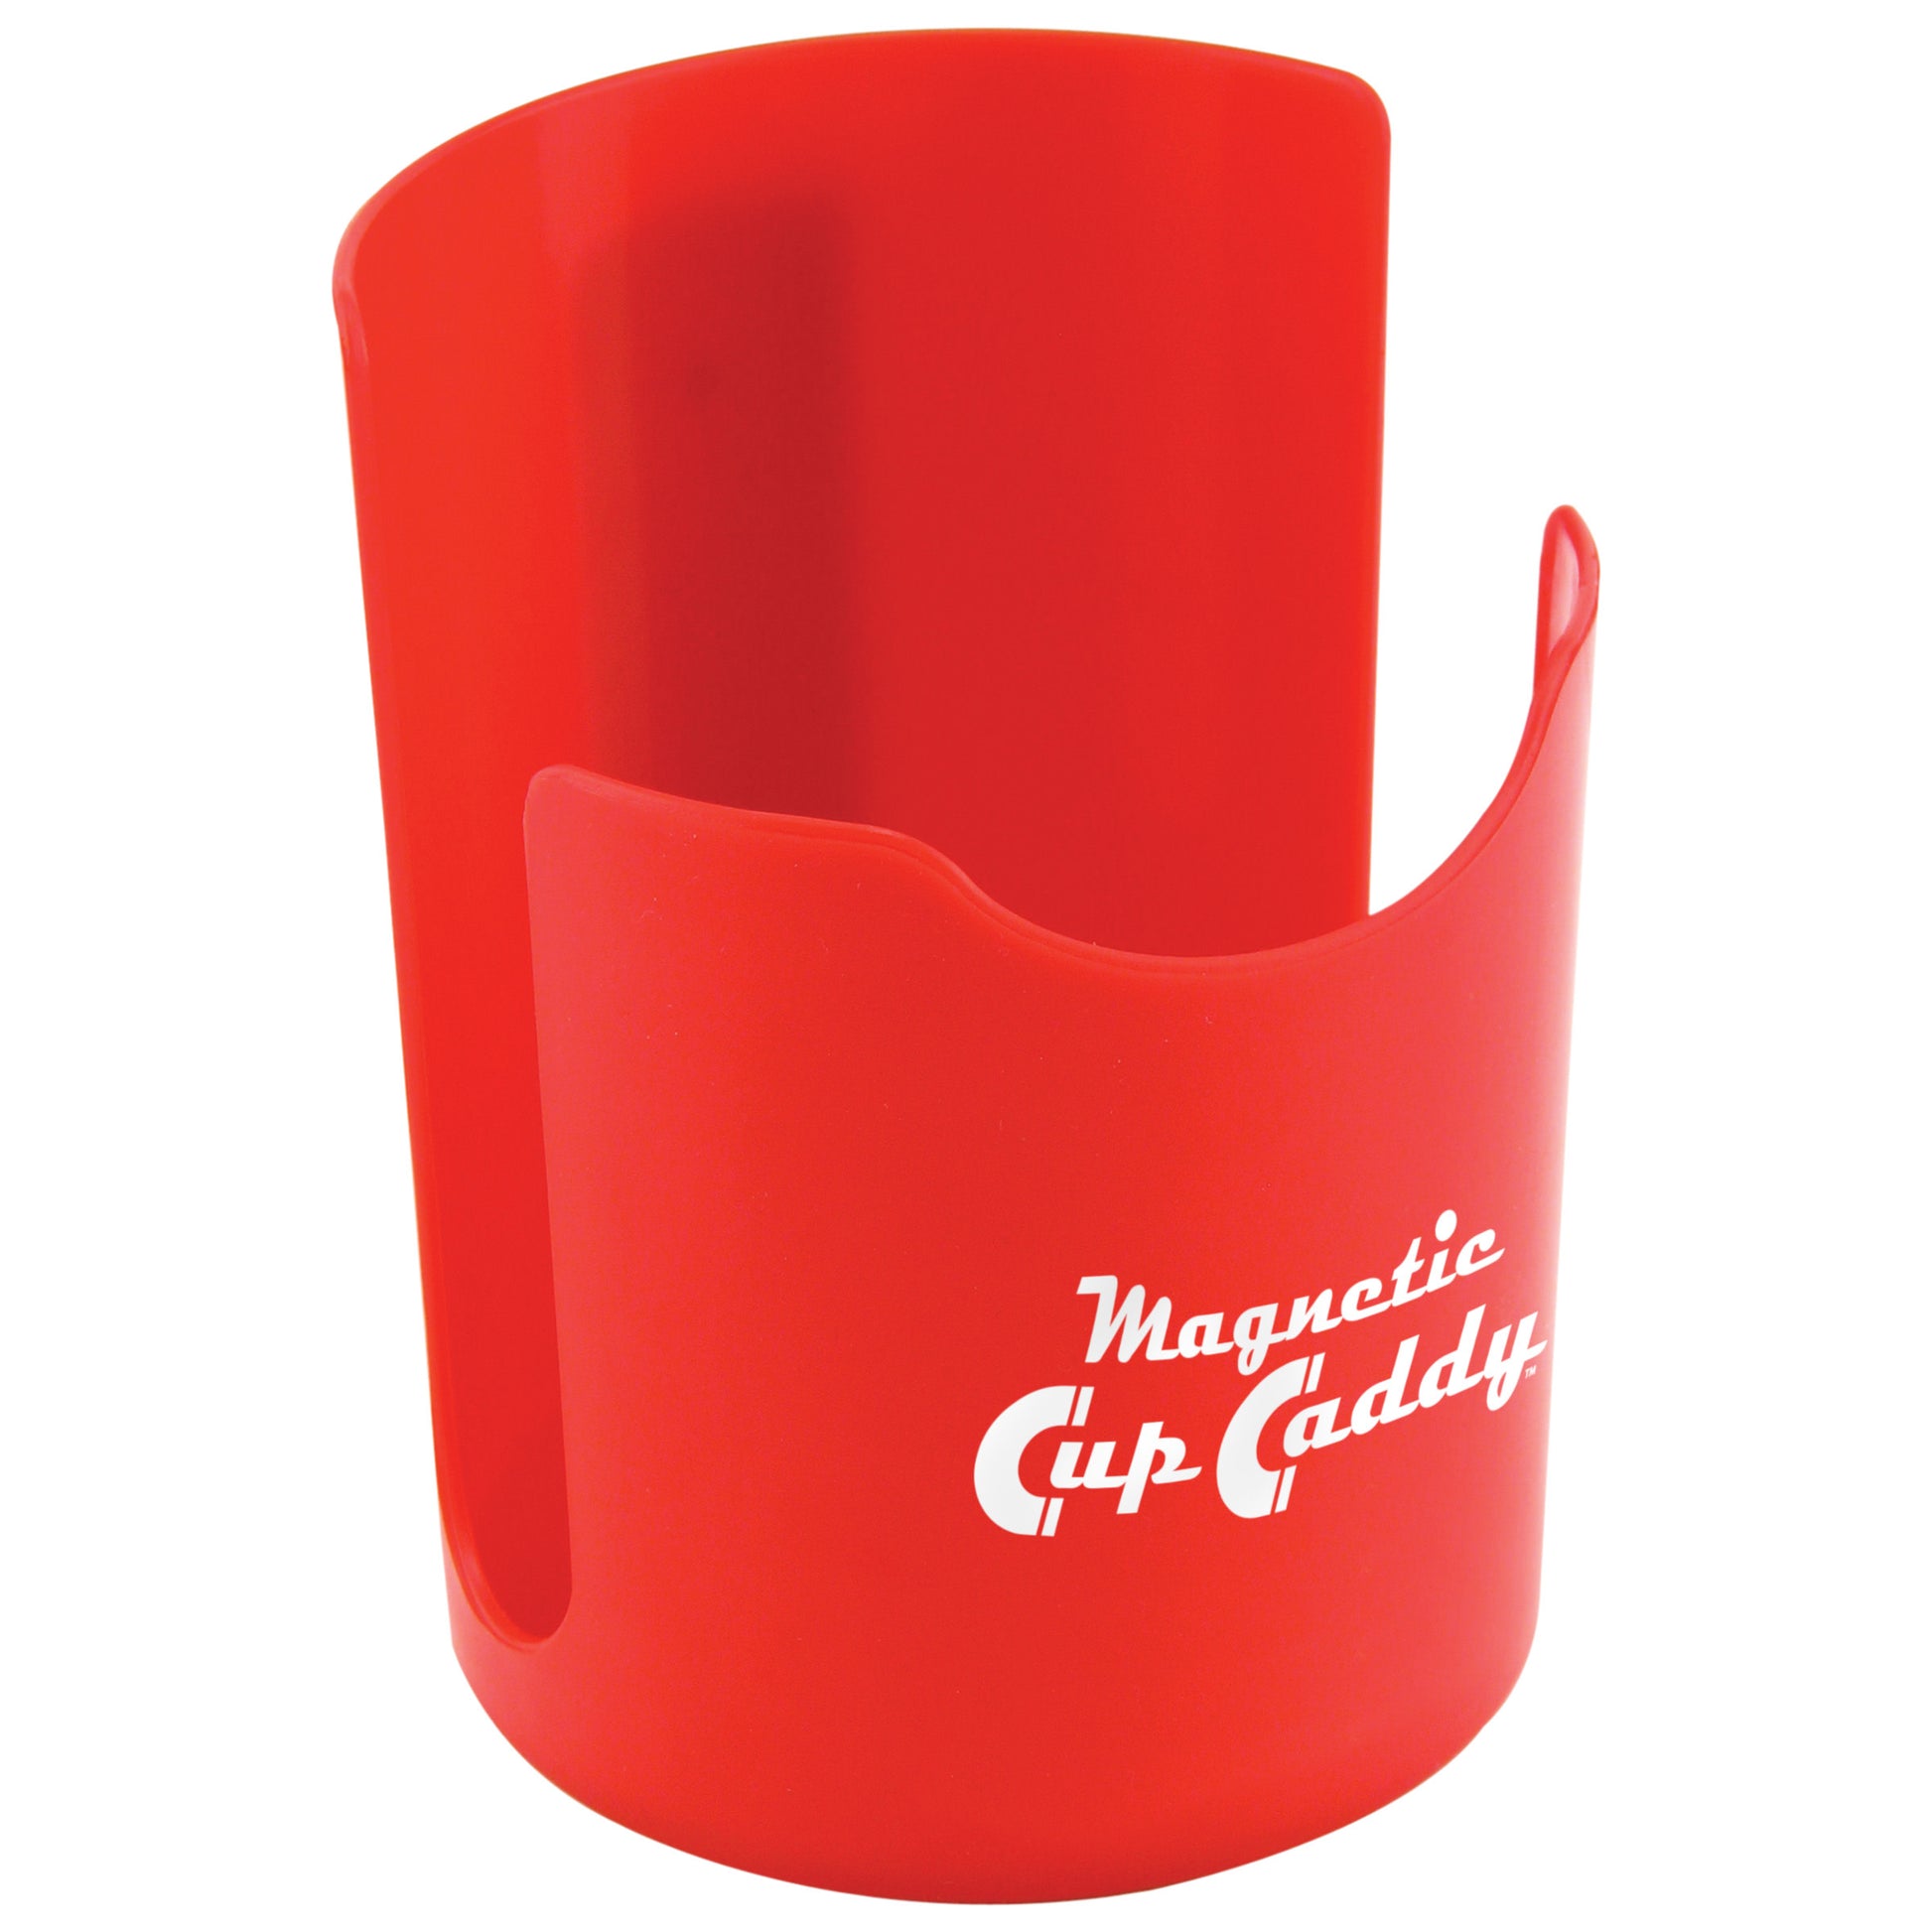 Load image into Gallery viewer, 07582 Magnetic Cup Caddy™, Red - 45 Degree Angle View